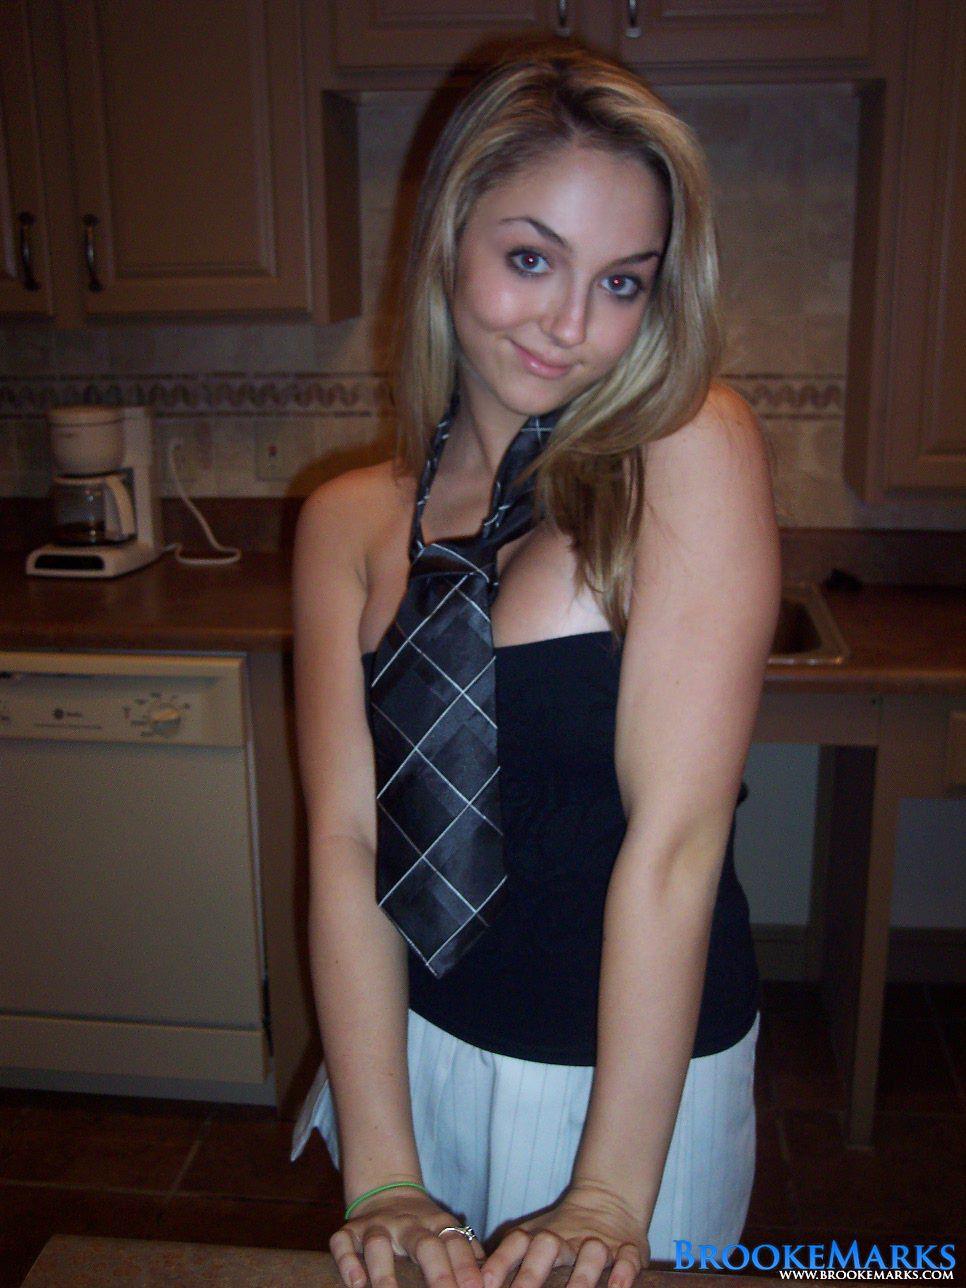 Blonde coed Brooke Marks gets naughty at the sorority house #53553286